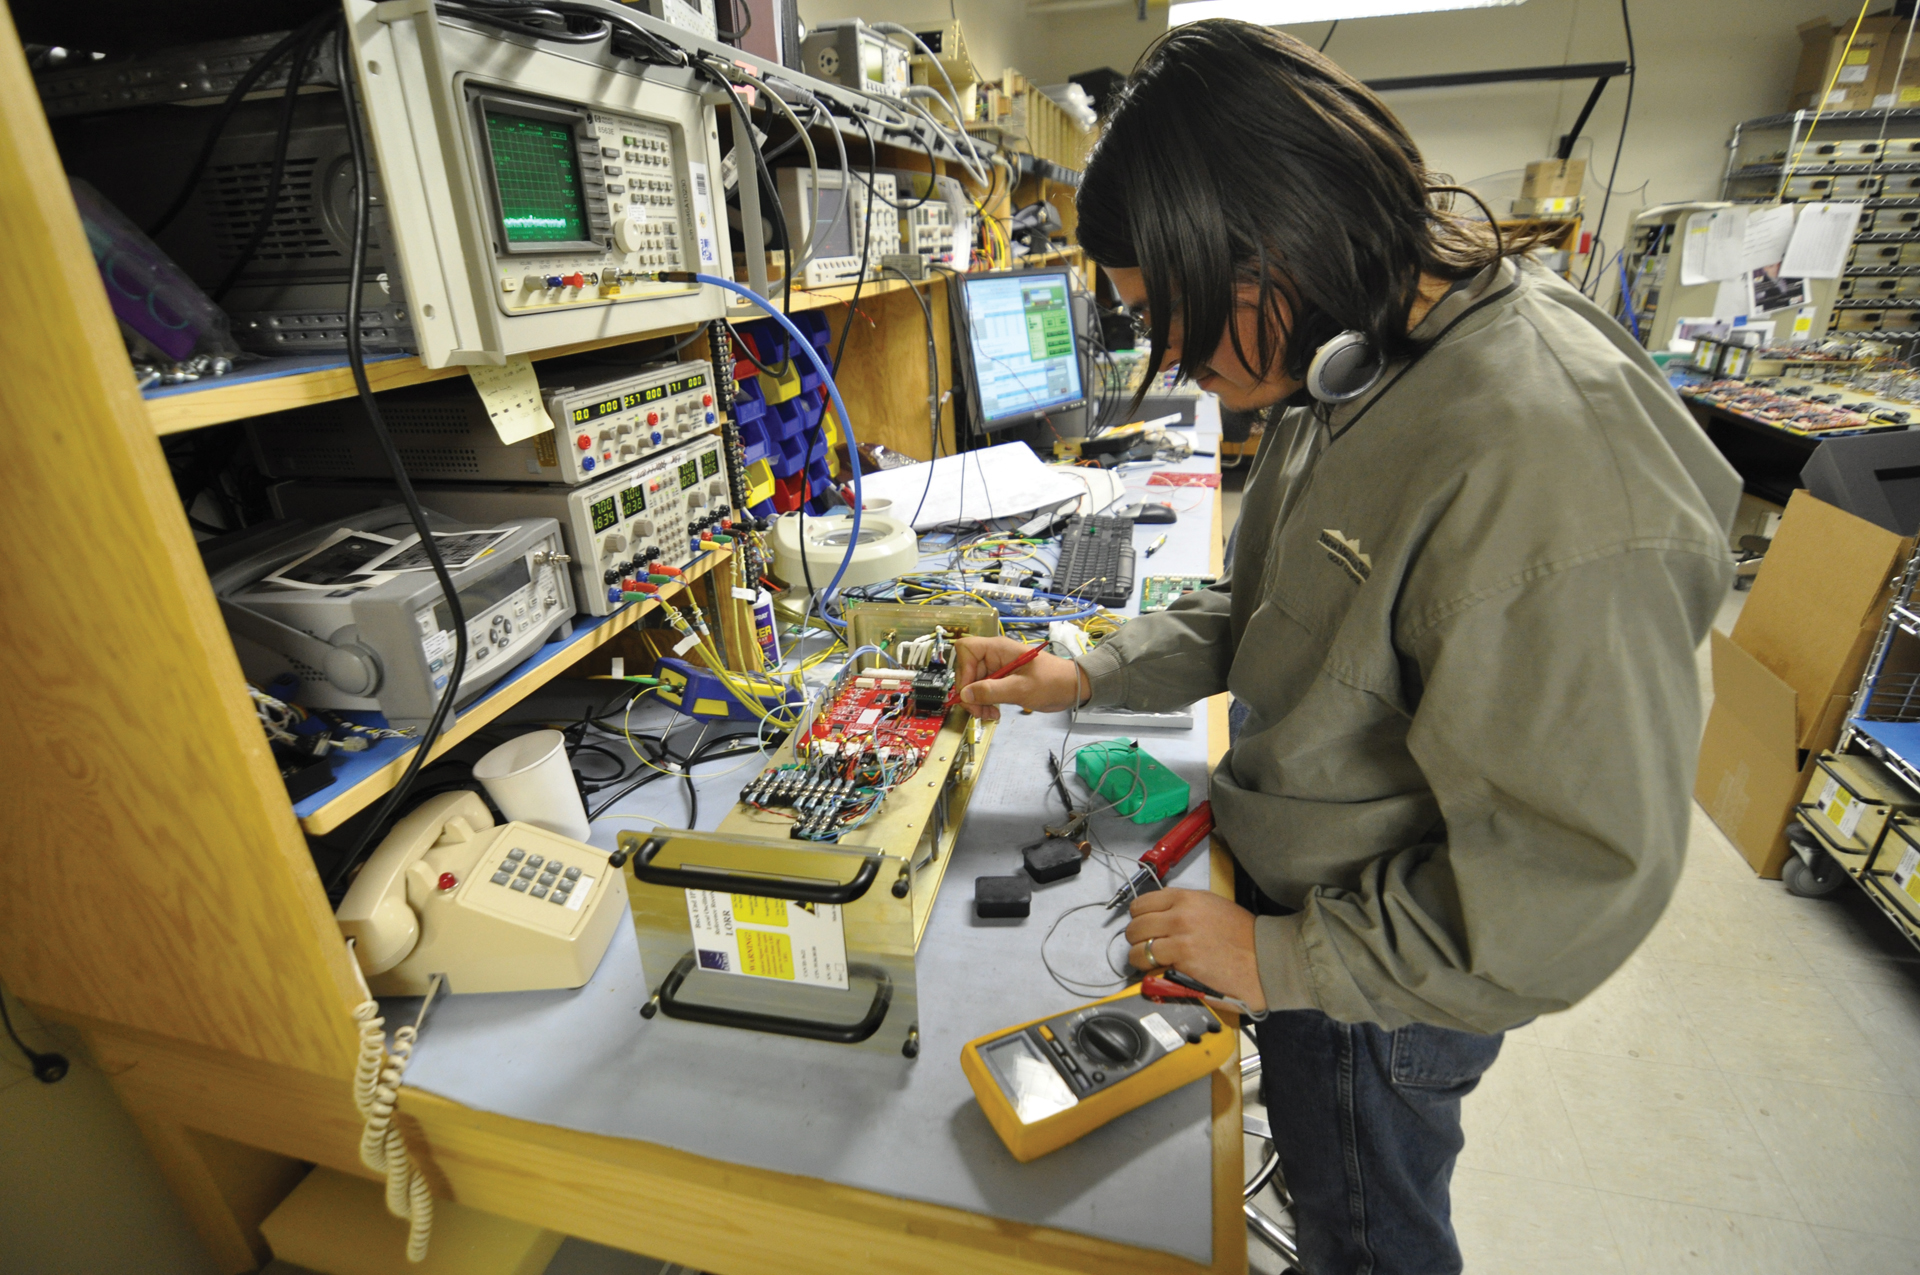 Electronics Labs in New Mexico